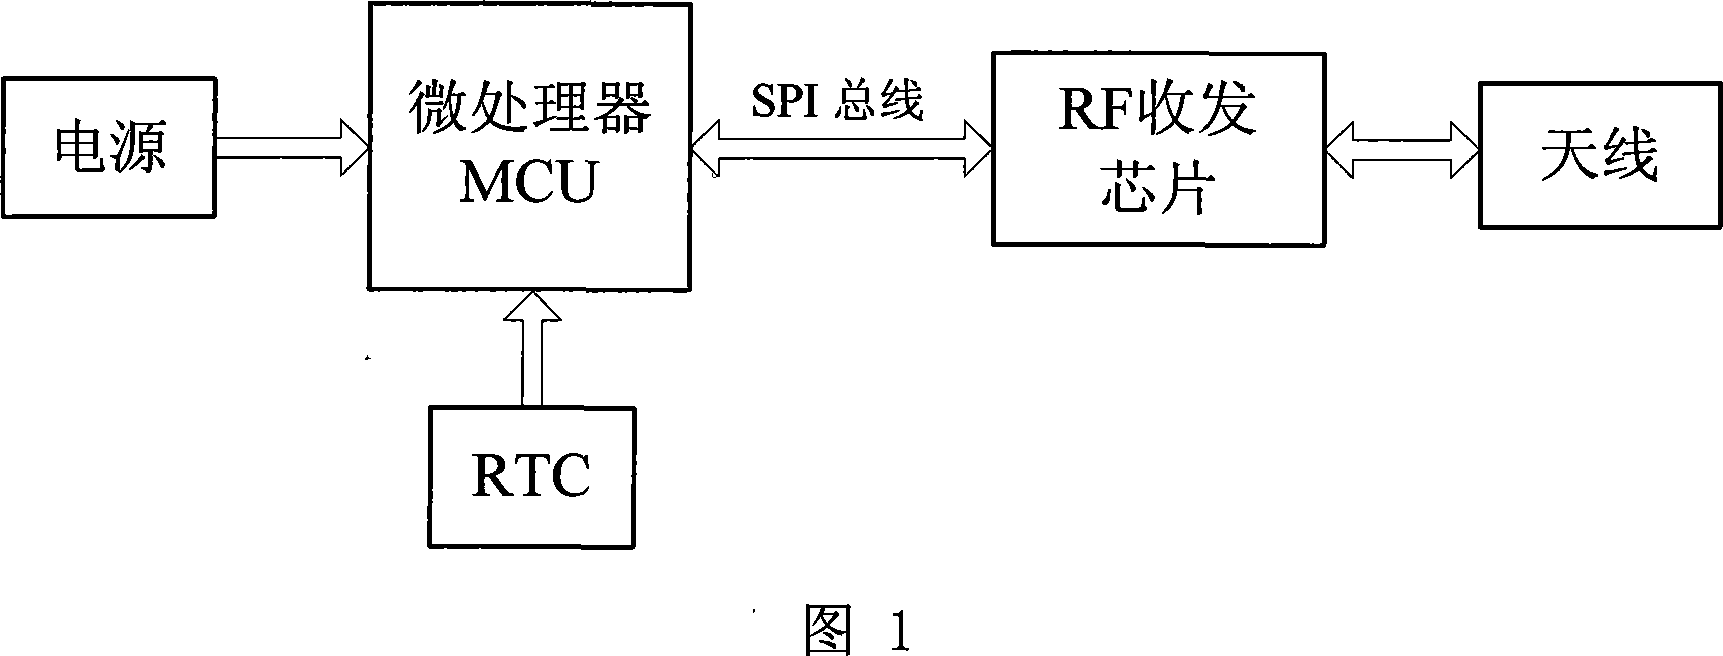 Novel active radio frequency identifying system and its operationn method